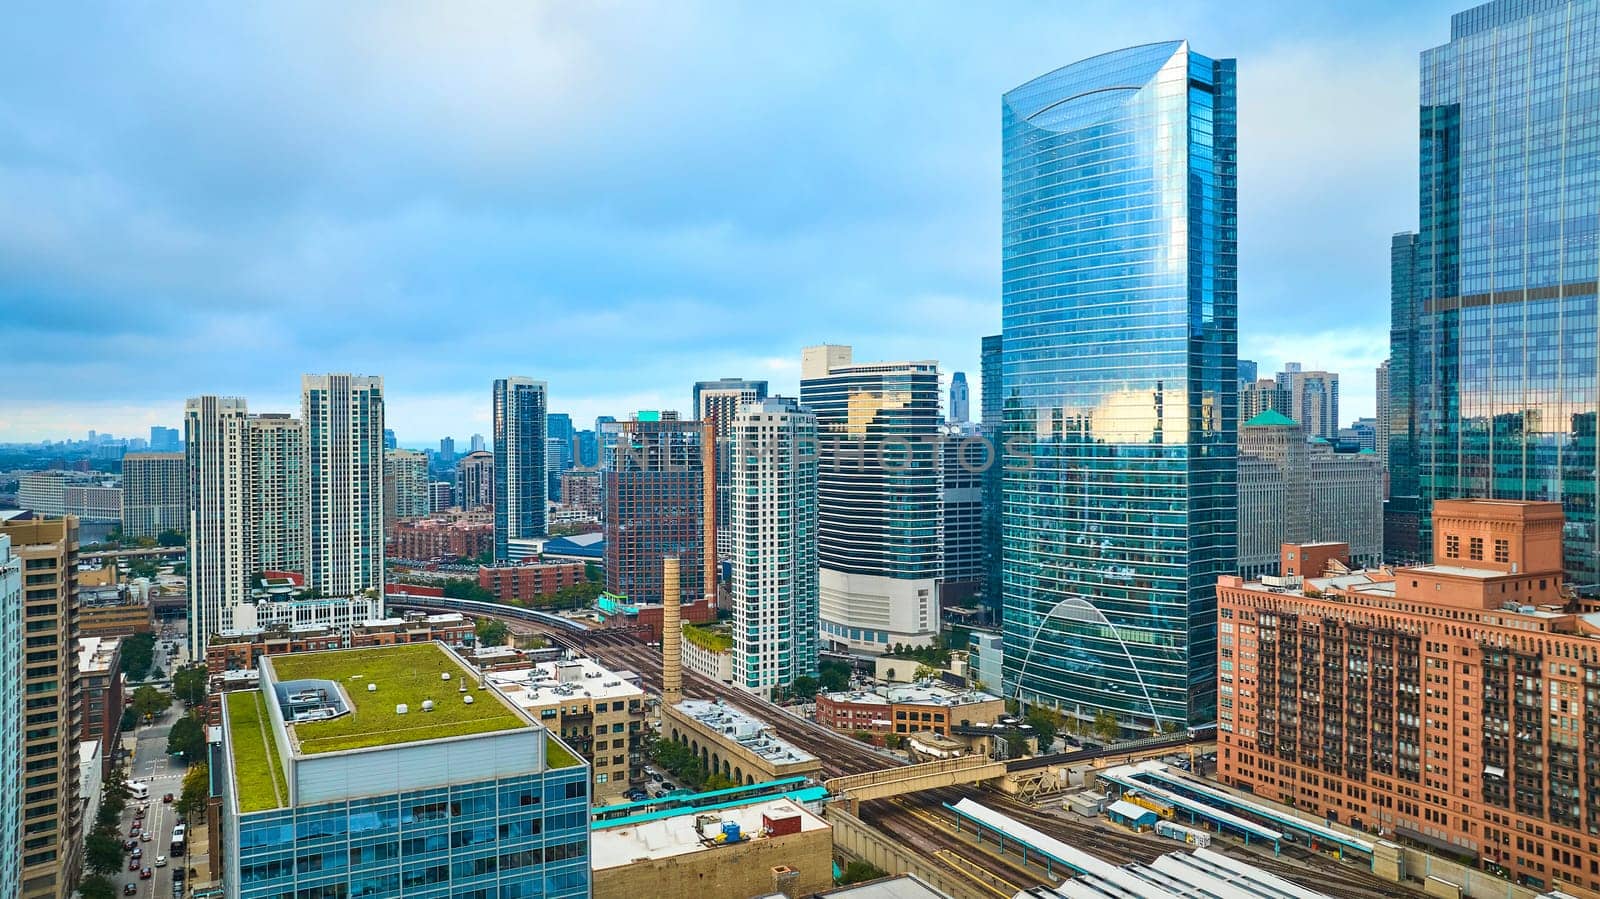 Downtown skyscraper buildings in Chicago aerial with green, eco friendly rooftop in summer by njproductions